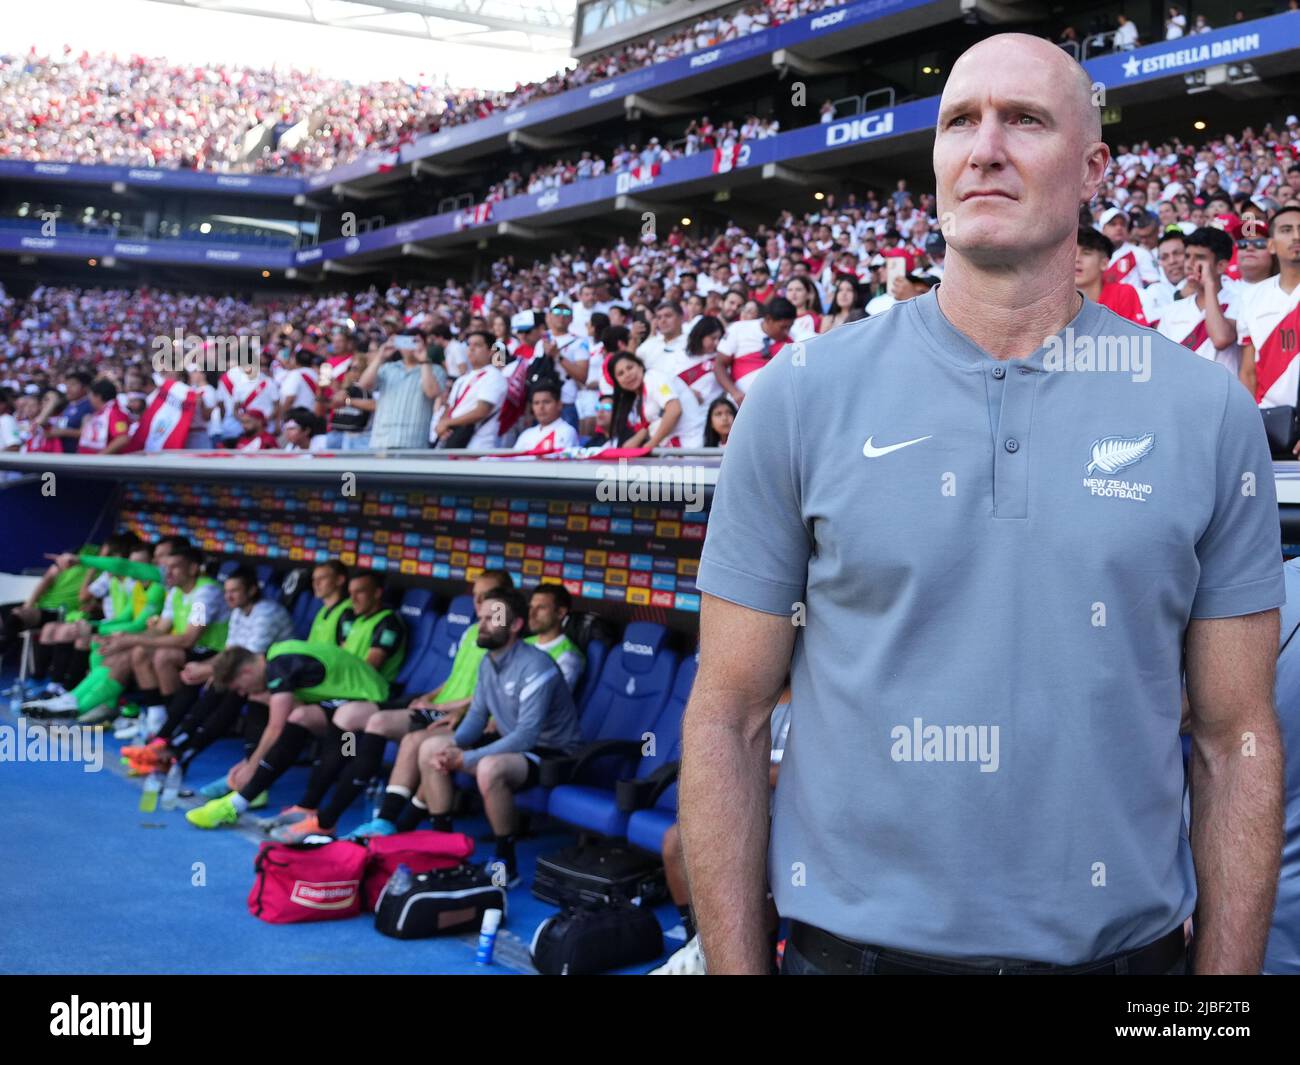 Barcelona, Spain. June 5, 2022, New Zealand head coach Danny Hay during the friendly match between Peru and New Zealand played at RCDE Stadium on June 5, 2022 in Barcelona, Spain. (Photo by Bagu Blanco / PRESSINPHOTO) Stock Photo